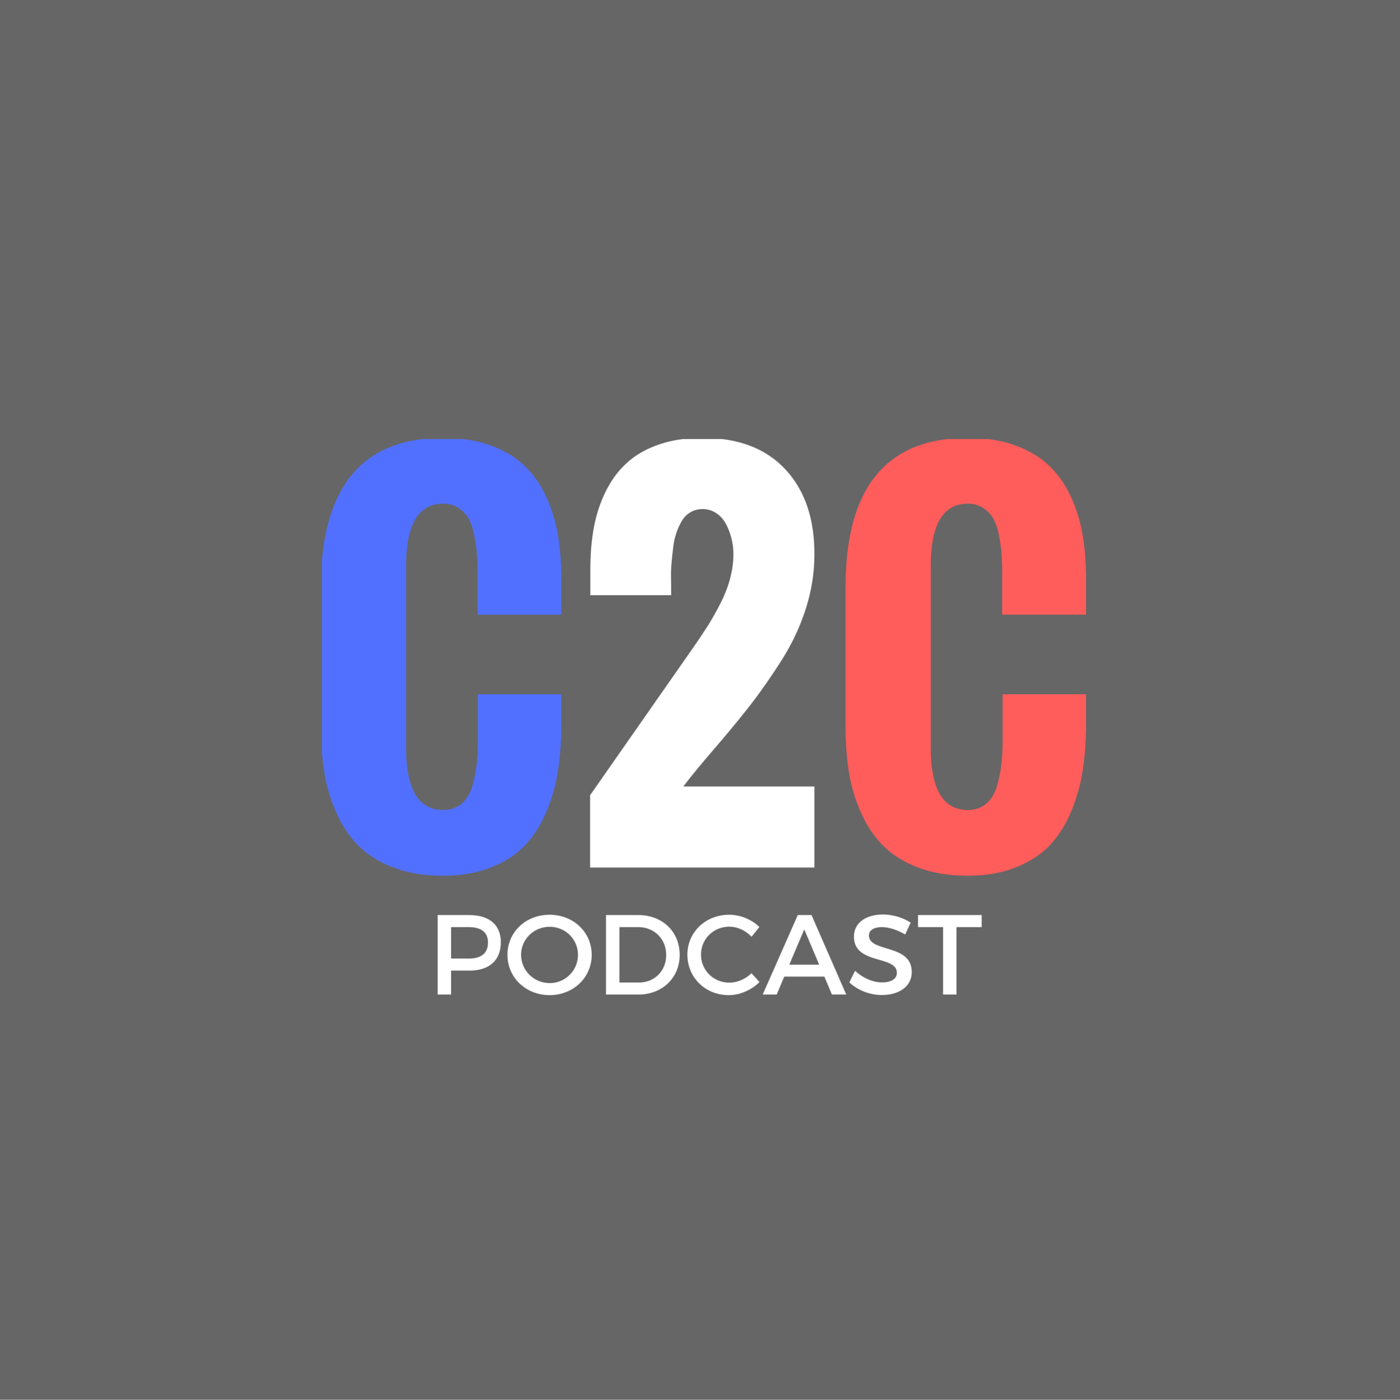 Coast 2 Coast Podcast Episode #13: News Rundown, Nerlens Noel Trades and Conference Tiers